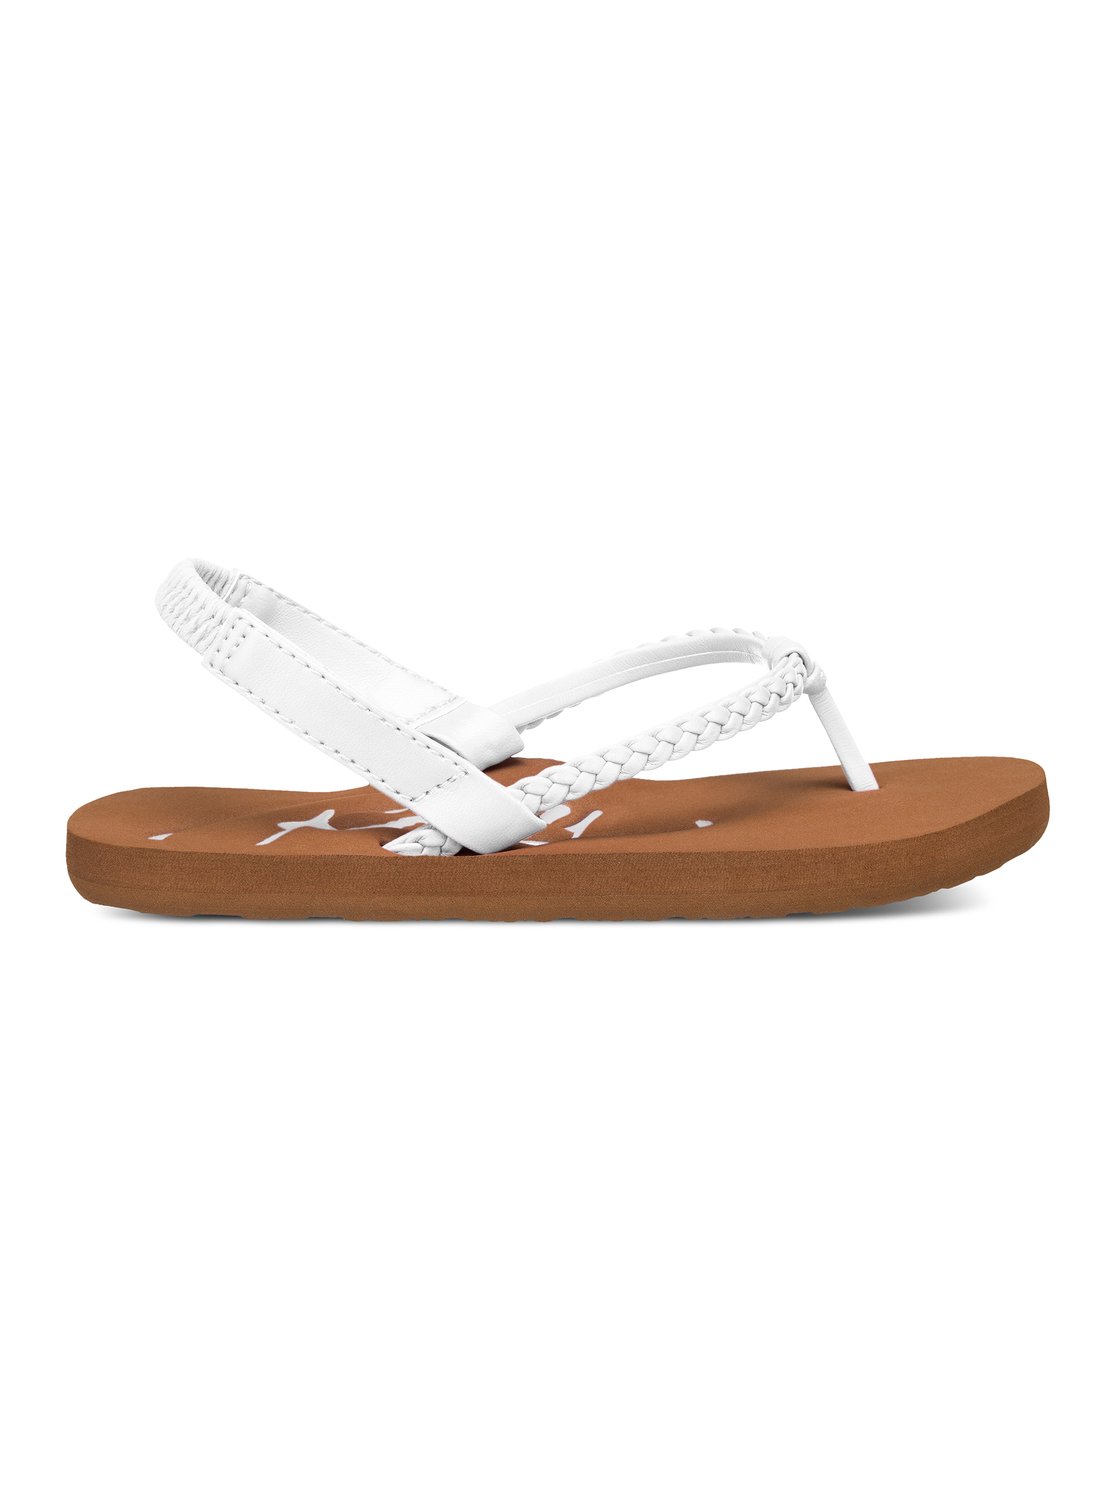 Cabo - Sandals 888701119395 | Roxy